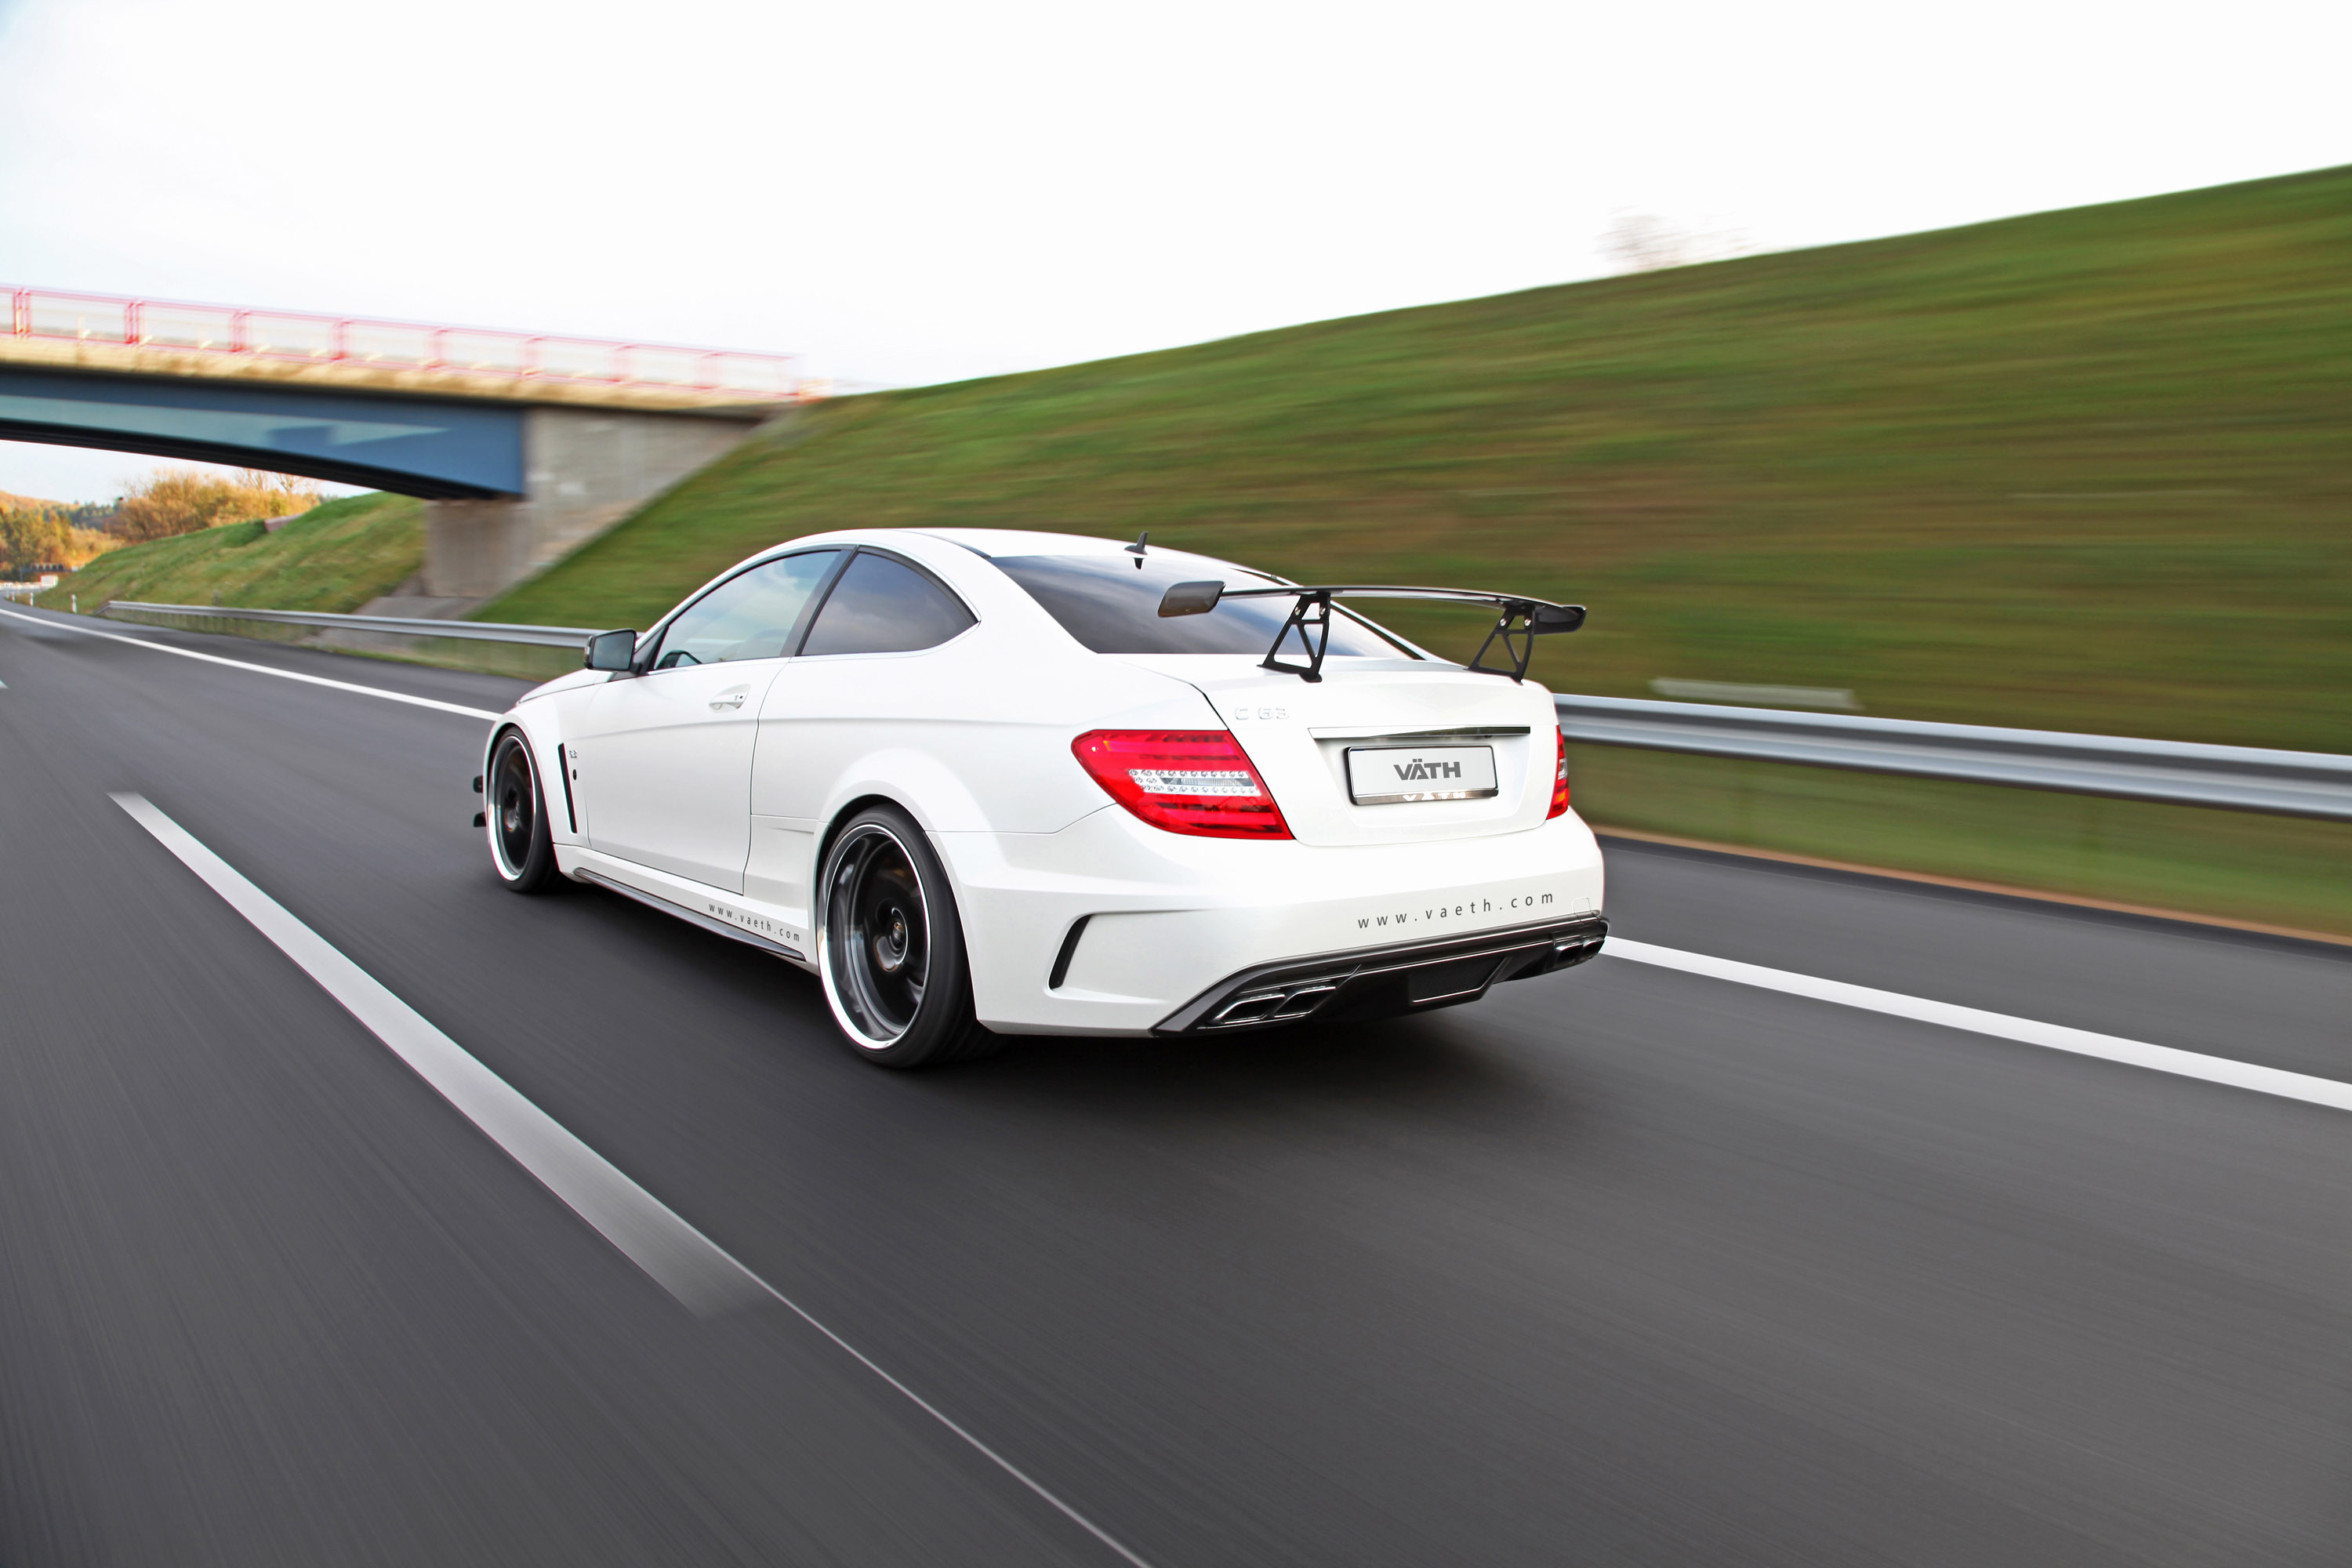 2012, Vath, Mercedes, Benz, V 63, Coupe, Supercharged, Tuning Wallpaper